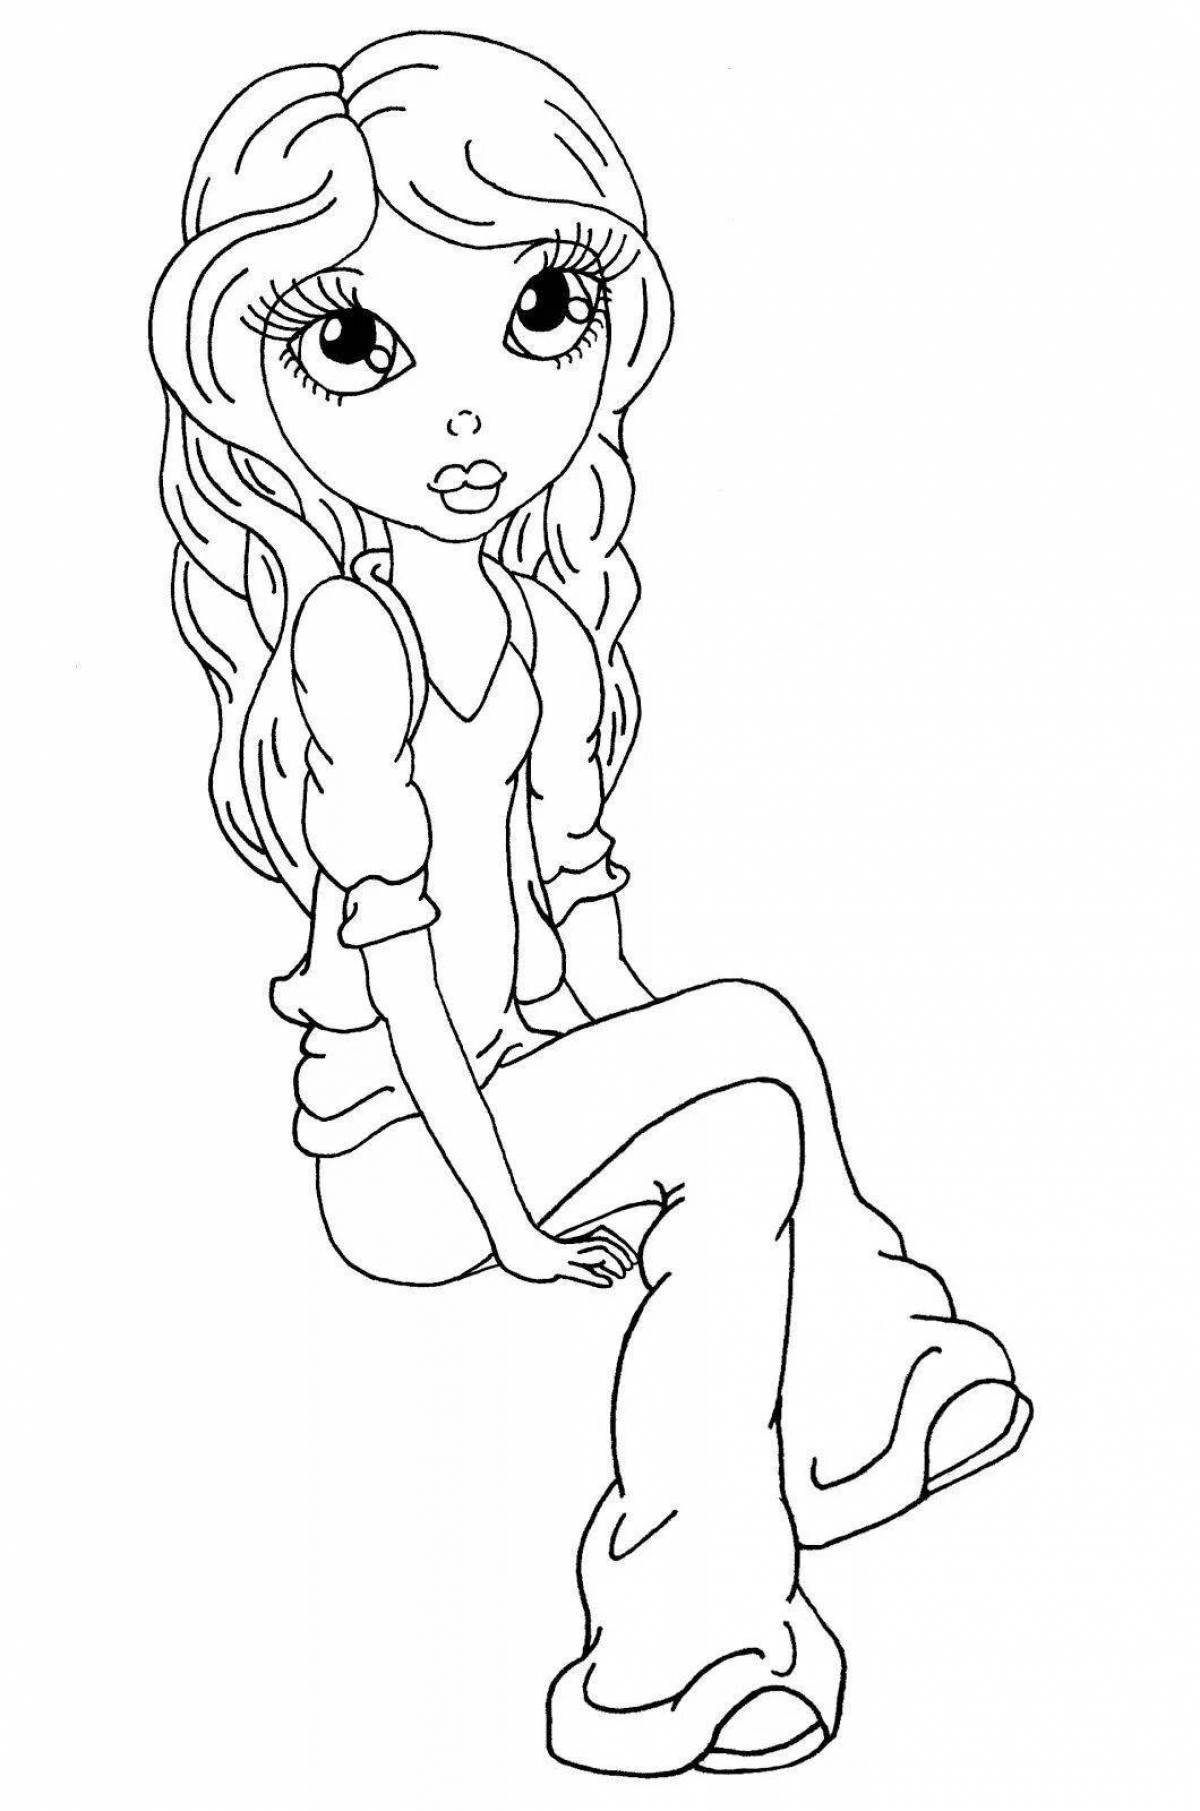 Luminous coloring page turn on light